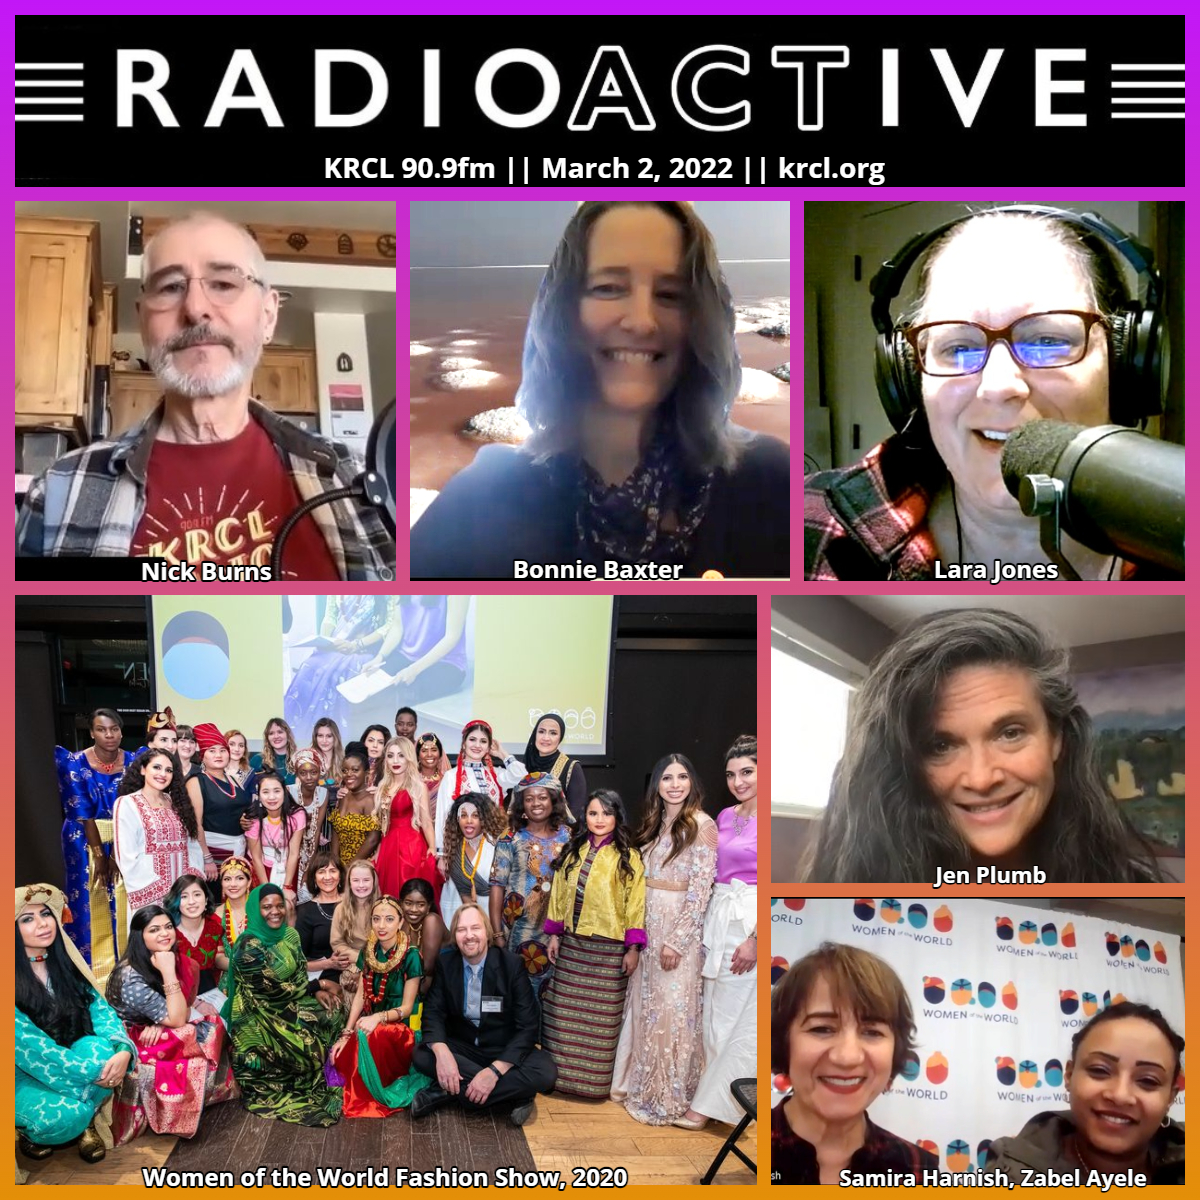 KRCL's RadioACTive guests for 3/2/22